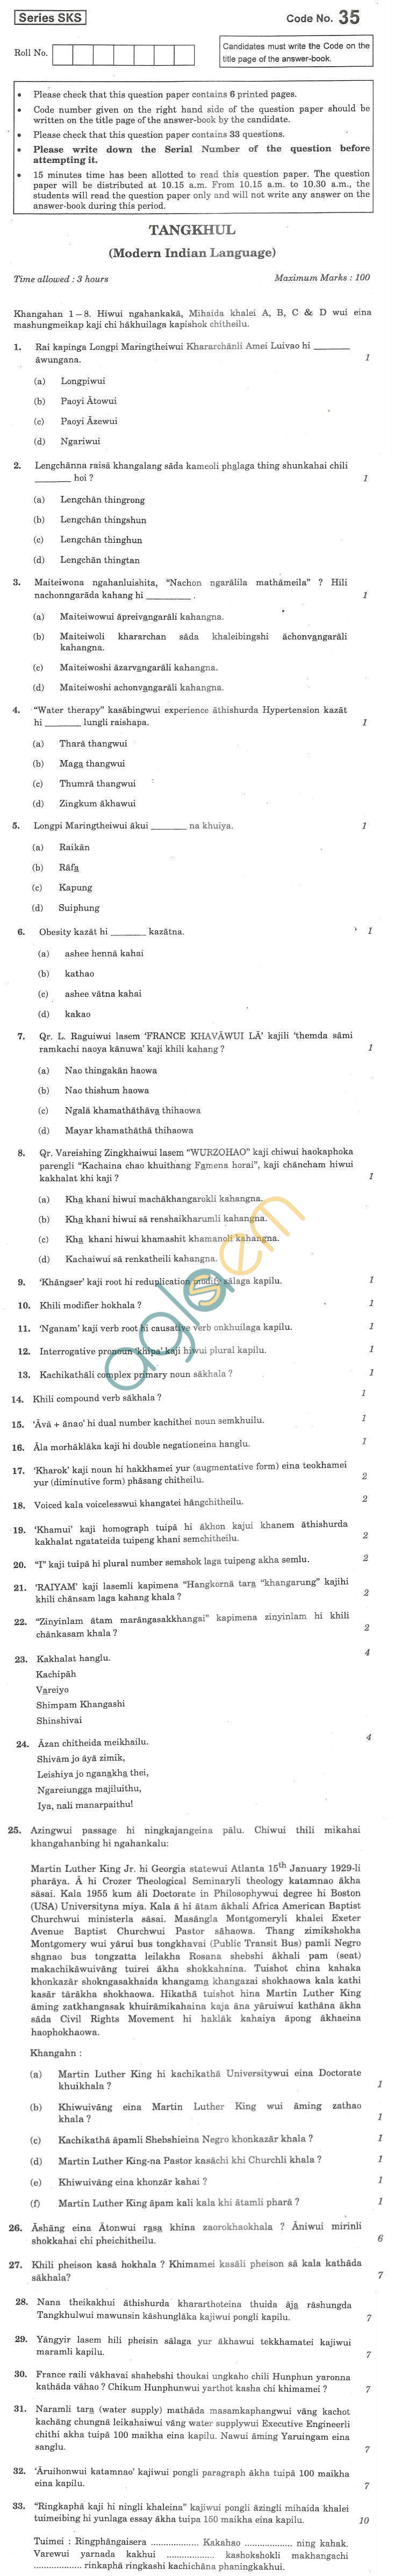 CBSE Board Exam 2013 Class XII Question Paper - Tangkhul